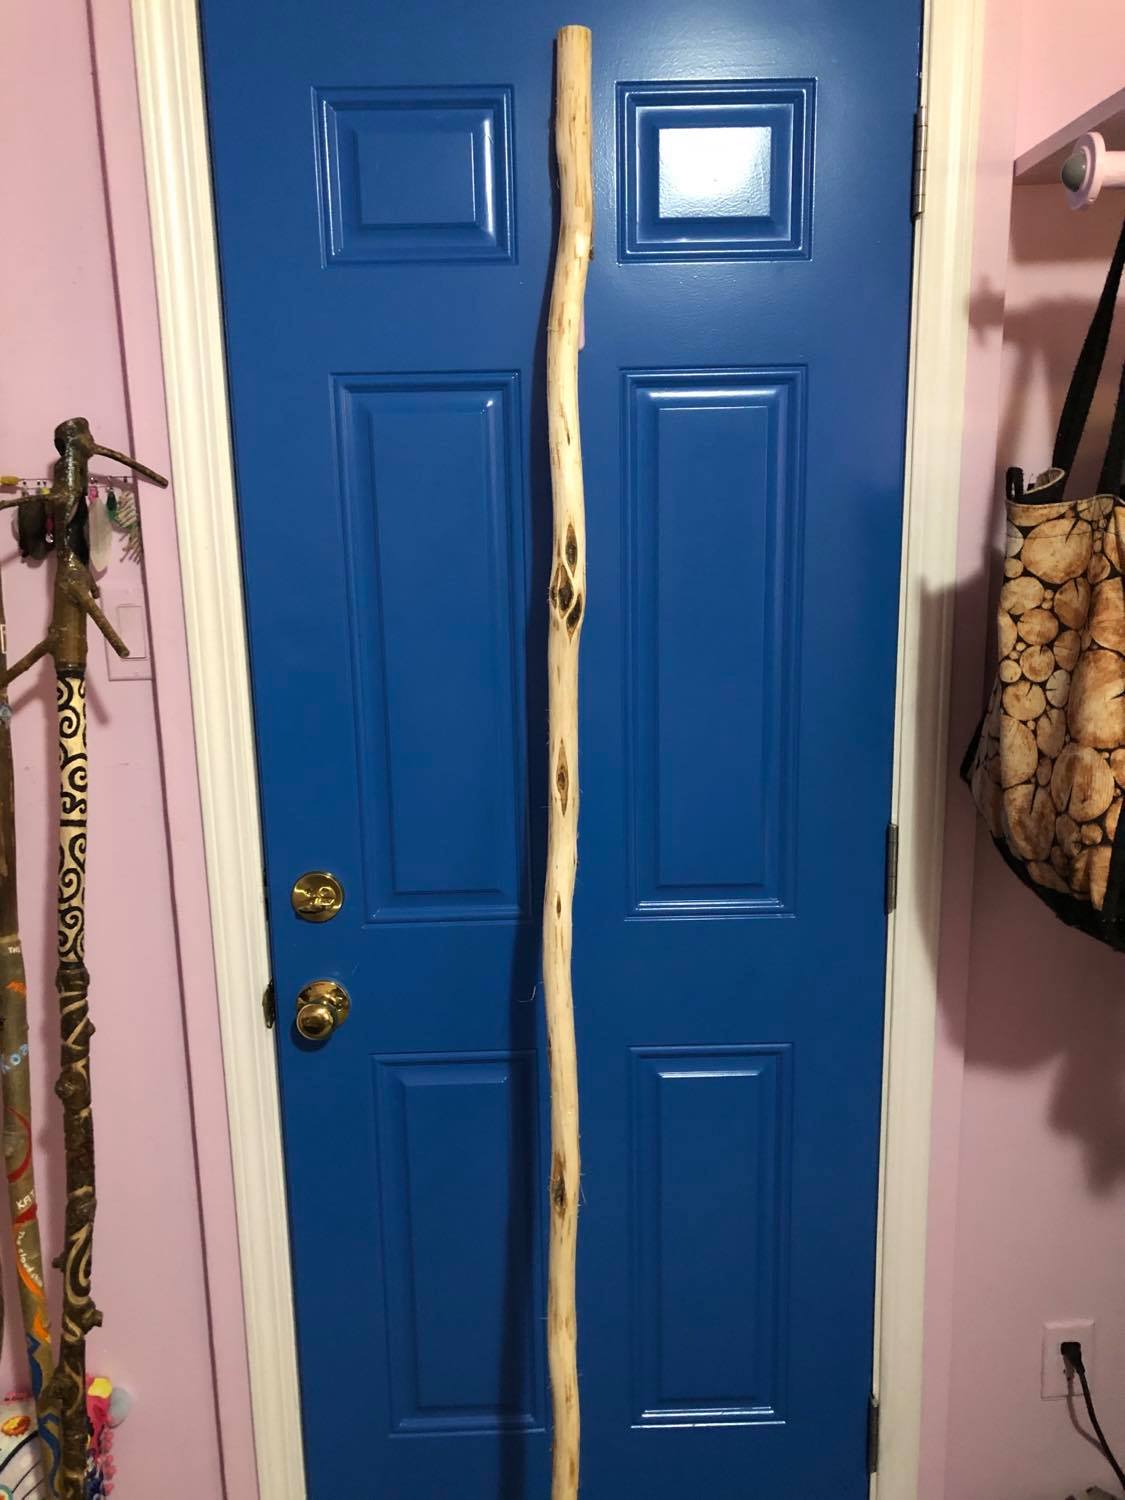 A white staff against a blue door.